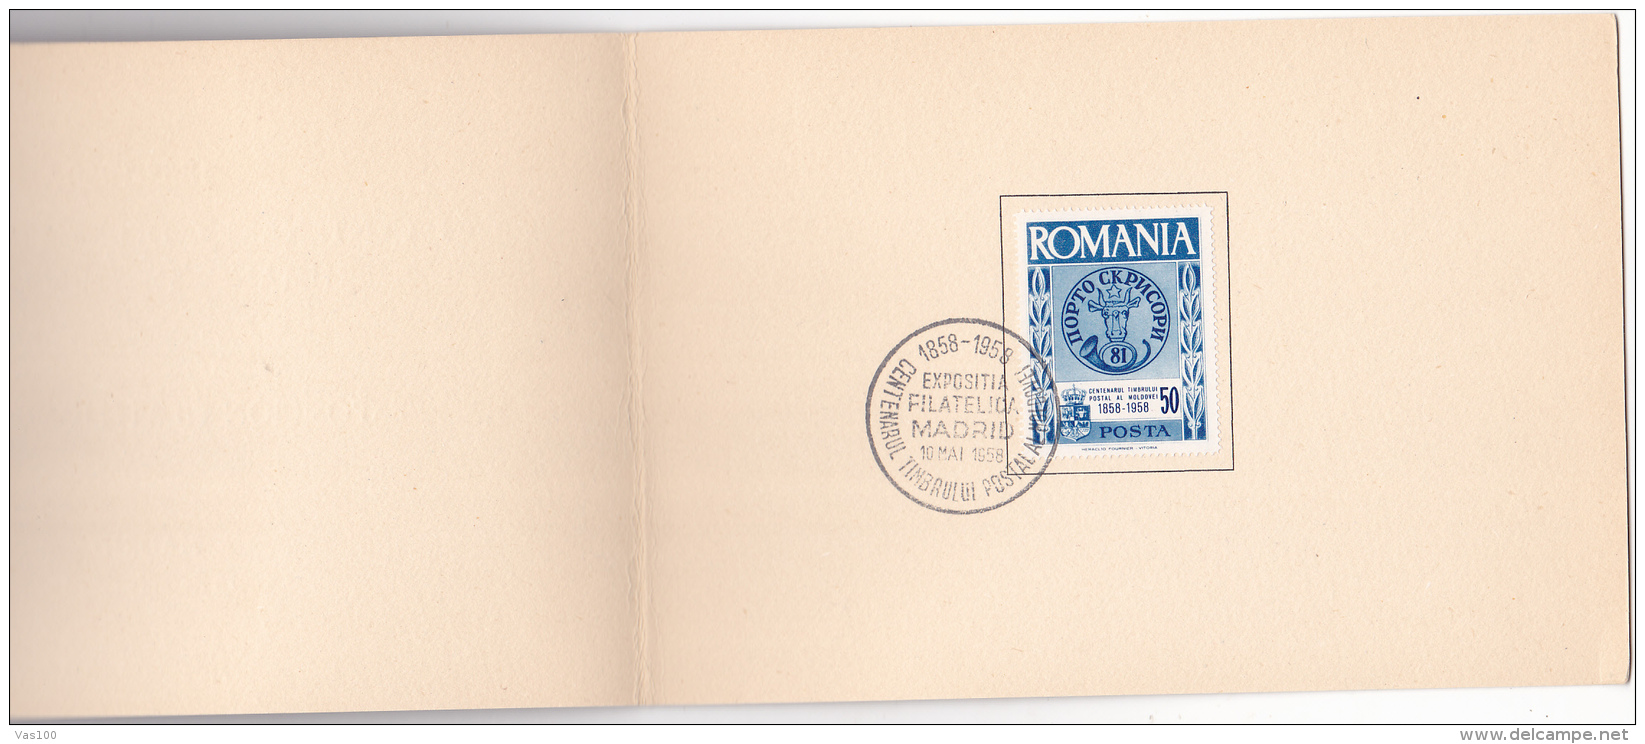 #T99     CENTENARY OF ROMANIAN STAMP FROM MOLDAVIA, ,    BOOKLETS,   1958  , SPAIN EXIL, ROMANIA. - Booklets